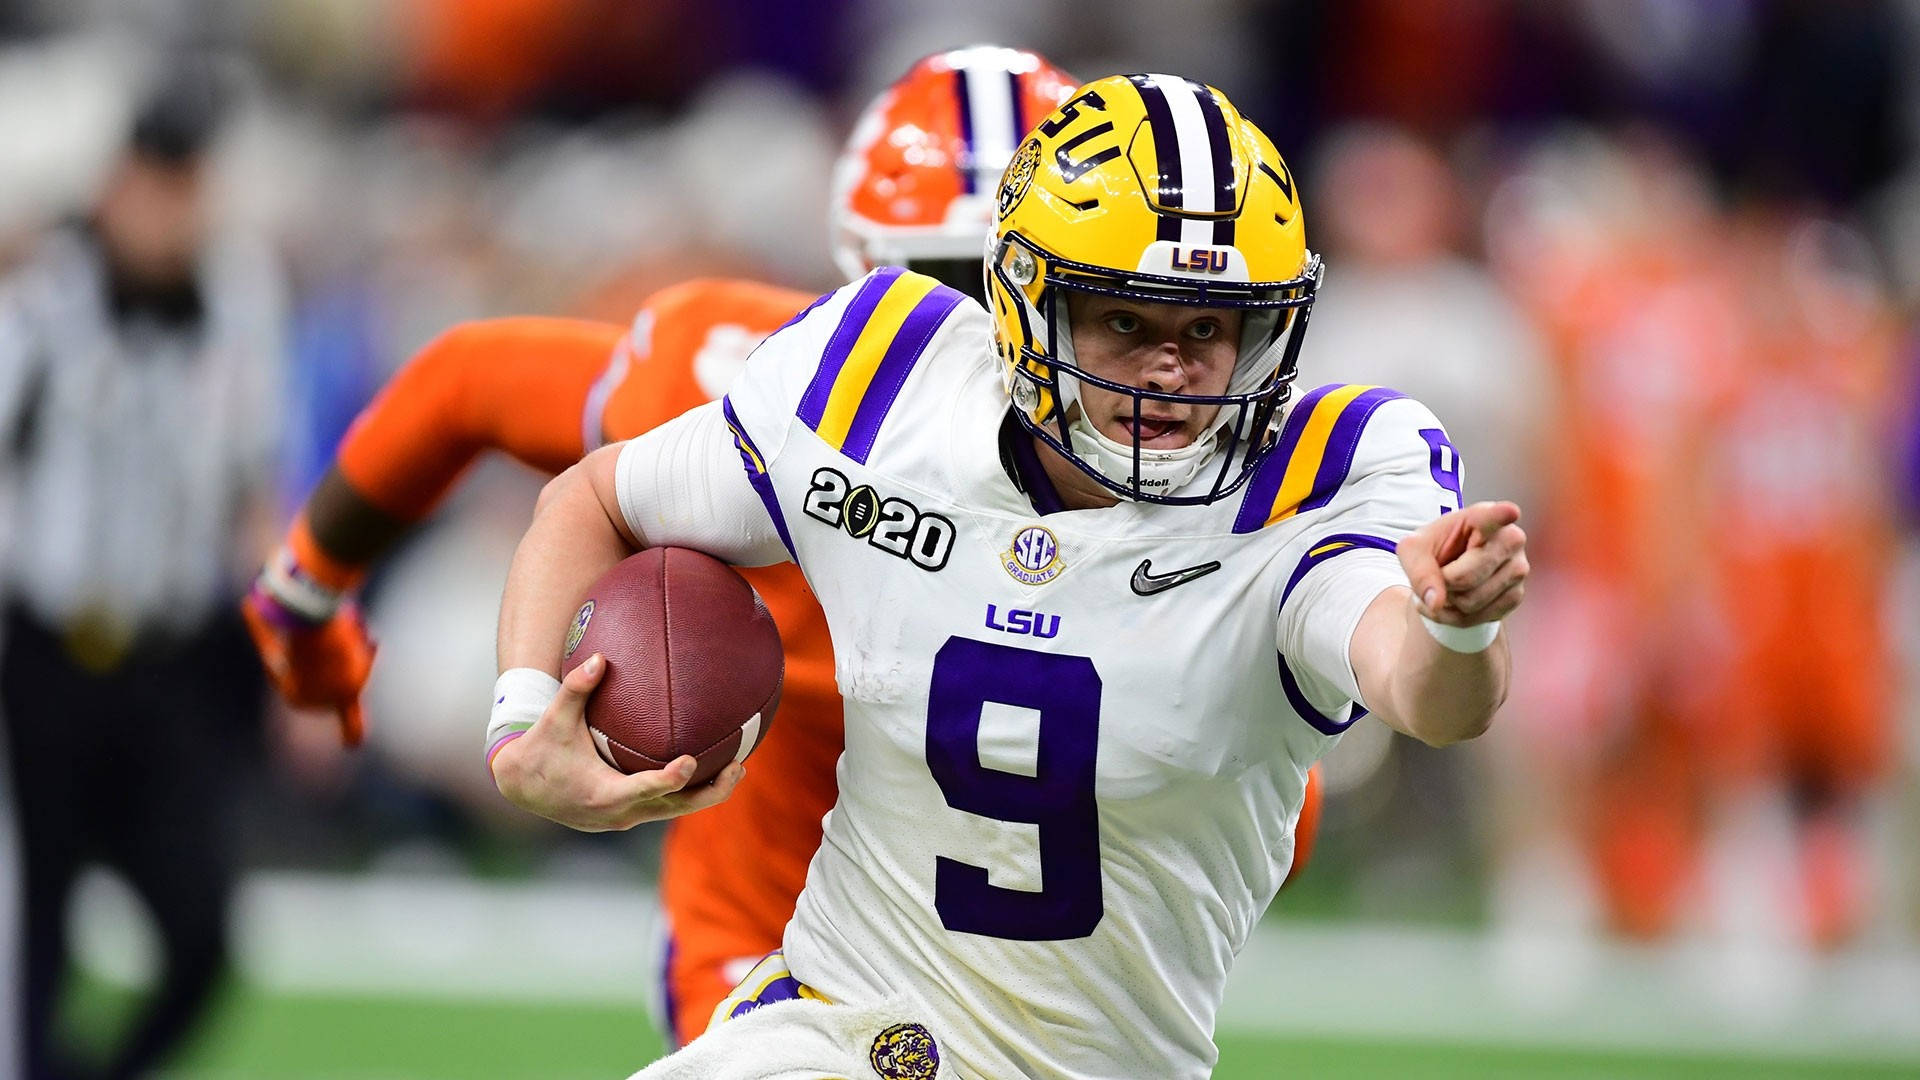 Joe Burrow Confidently Pointing During A Game Background